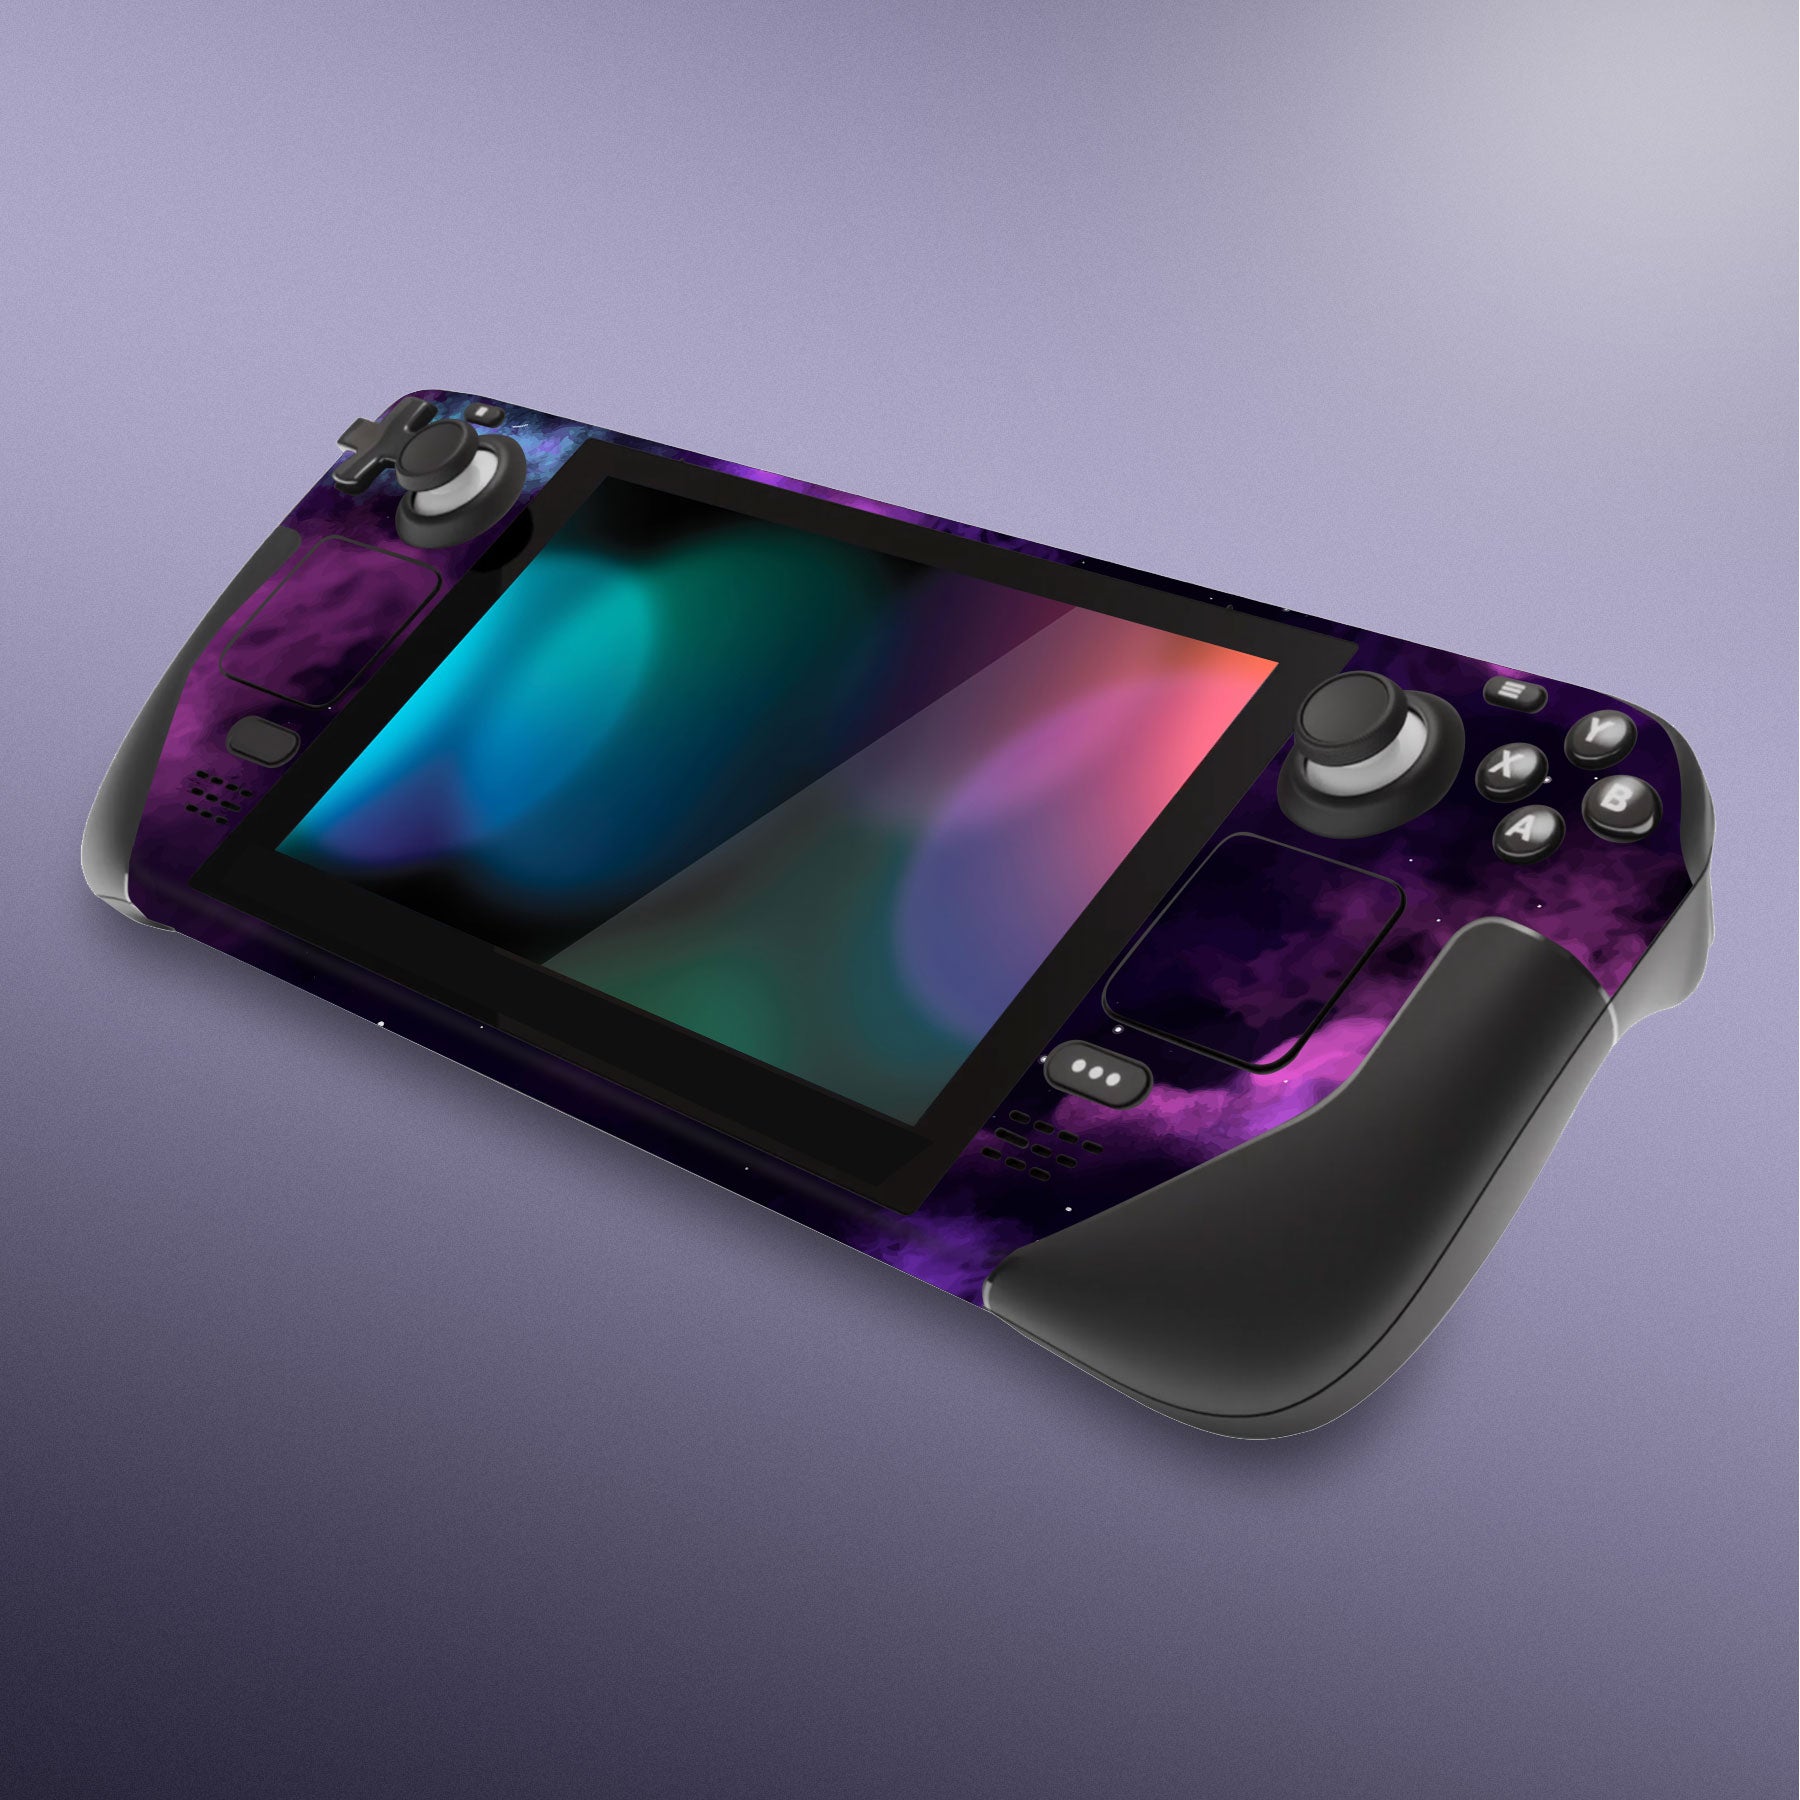 PlayVital Full Set Protective Skin Decal for Steam Deck, Custom Stickers Vinyl Cover for Steam Deck Handheld Gaming PC - Purple Deep Space - SDTM020 playvital